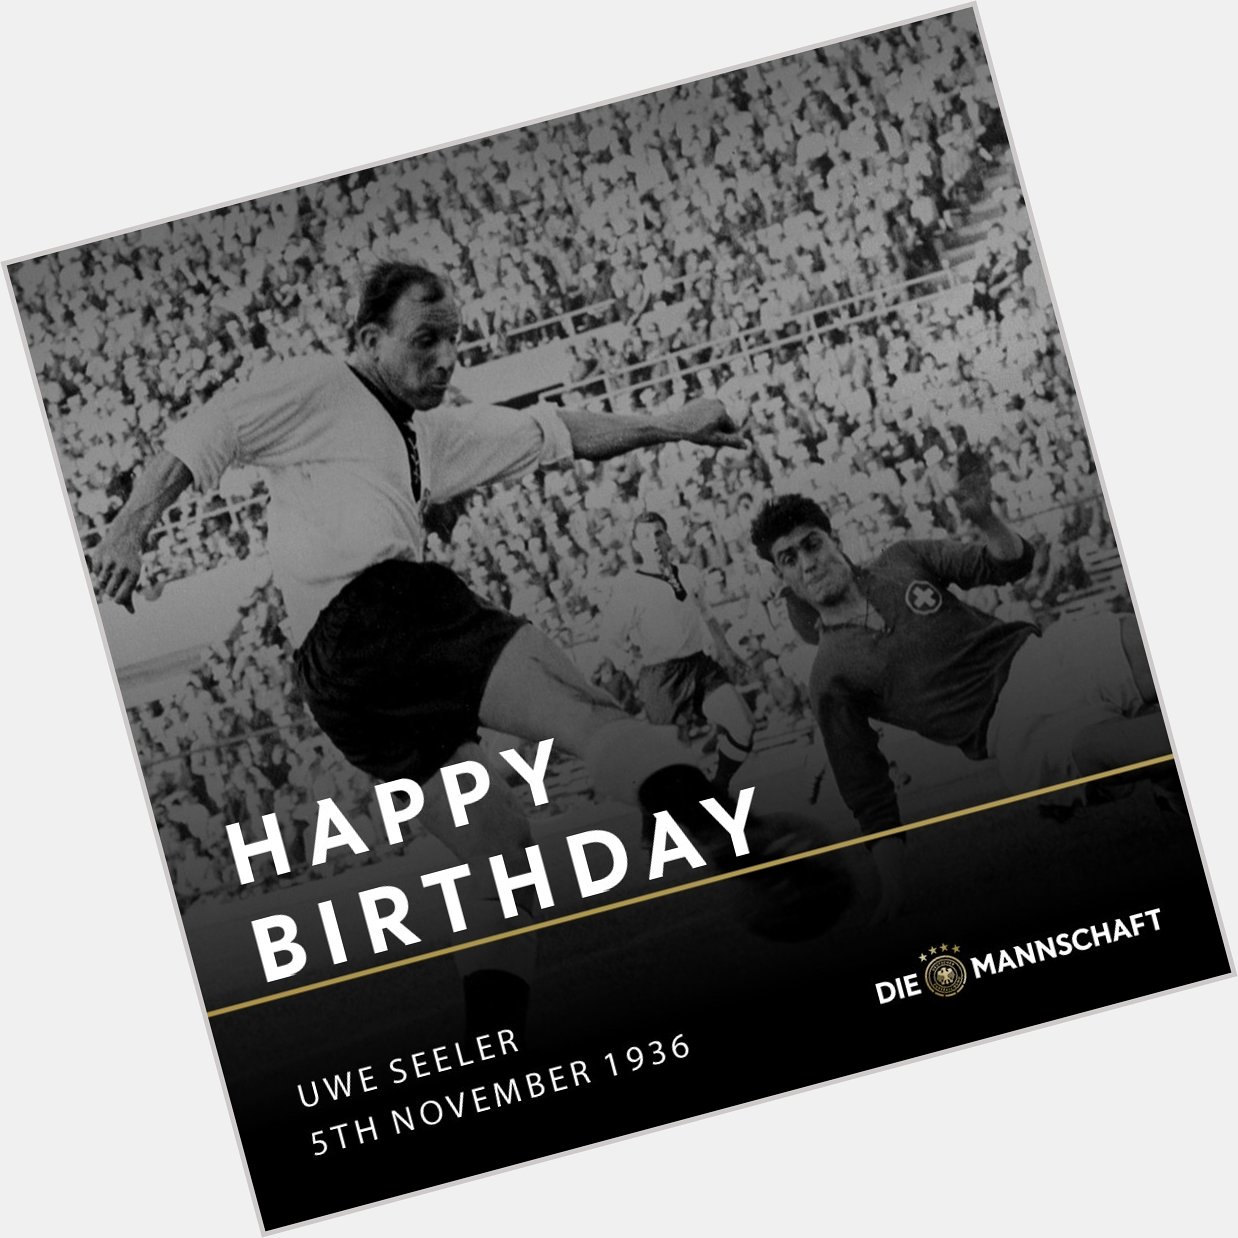 Happy birthday, Uwe Seeler! Our four-time World Cup participant turns 81 today   